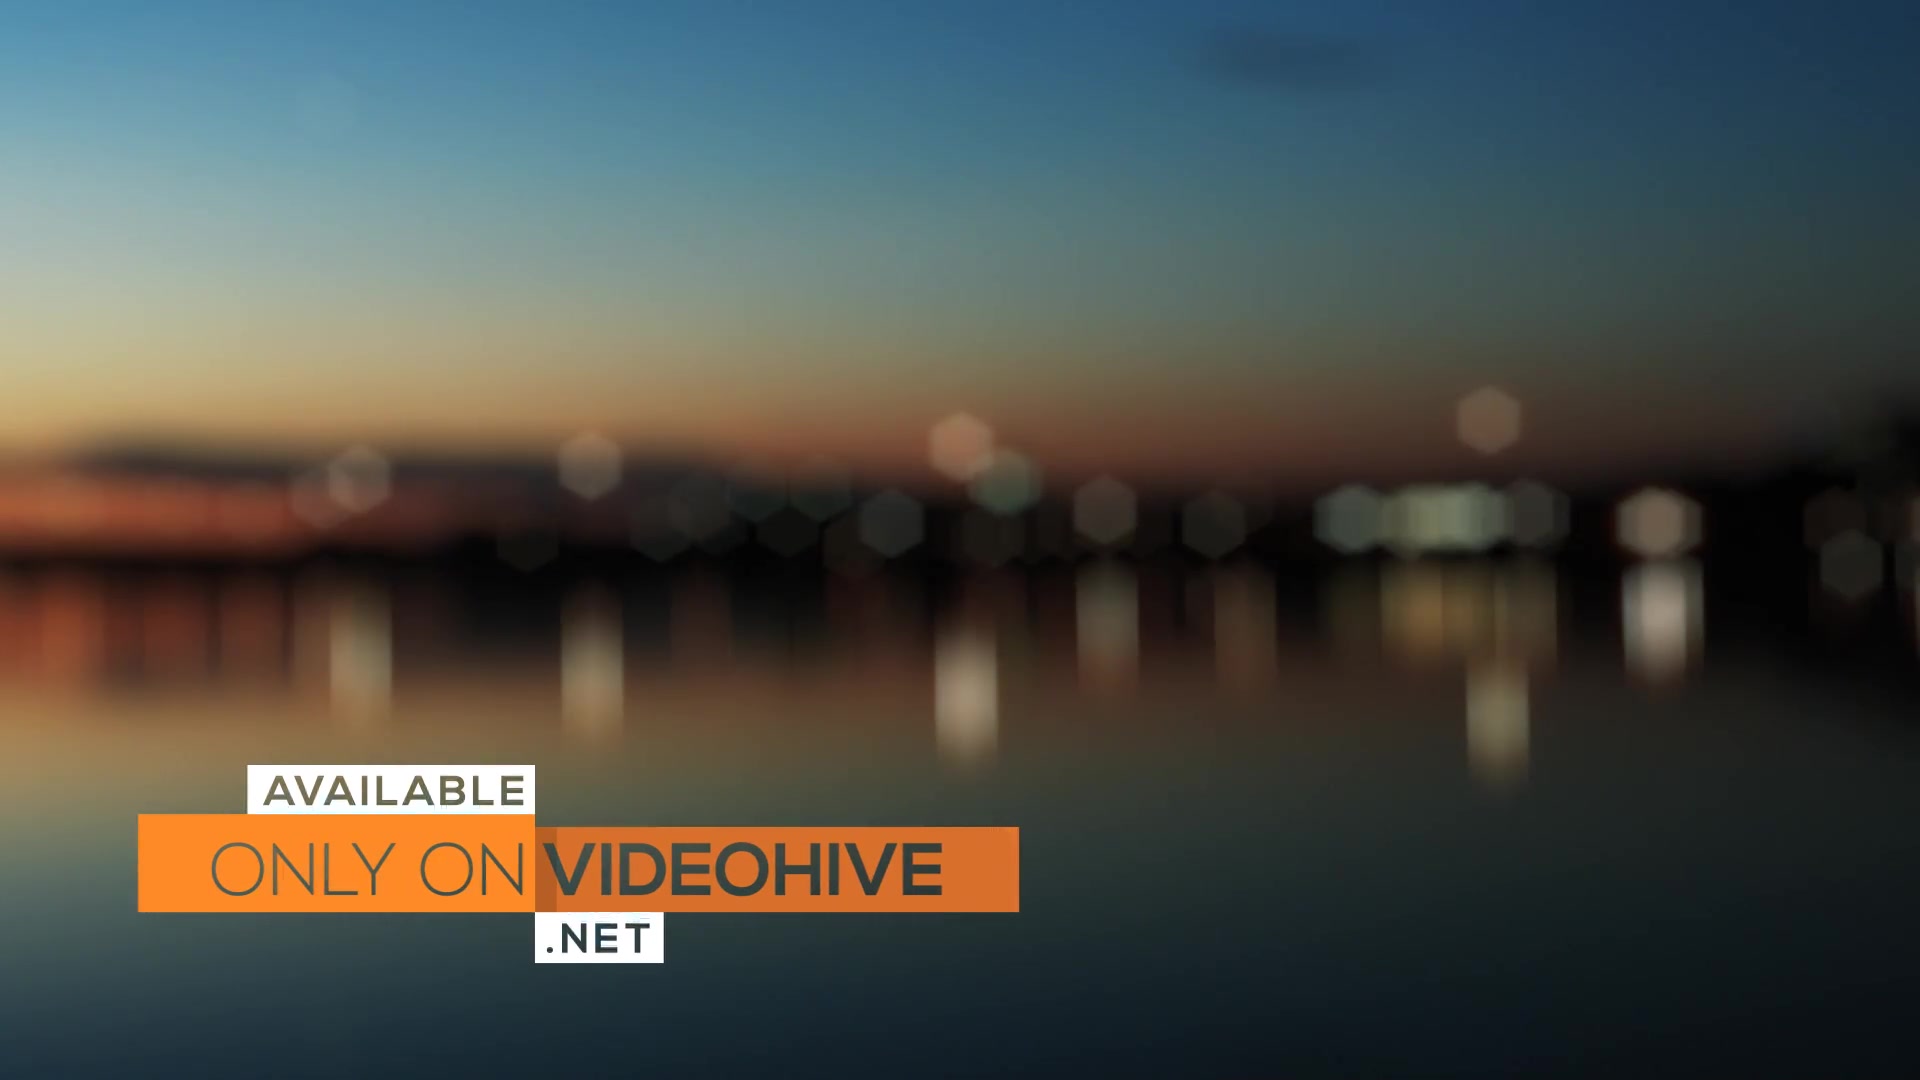 Simple Lower Thirds - Download Videohive 12125722